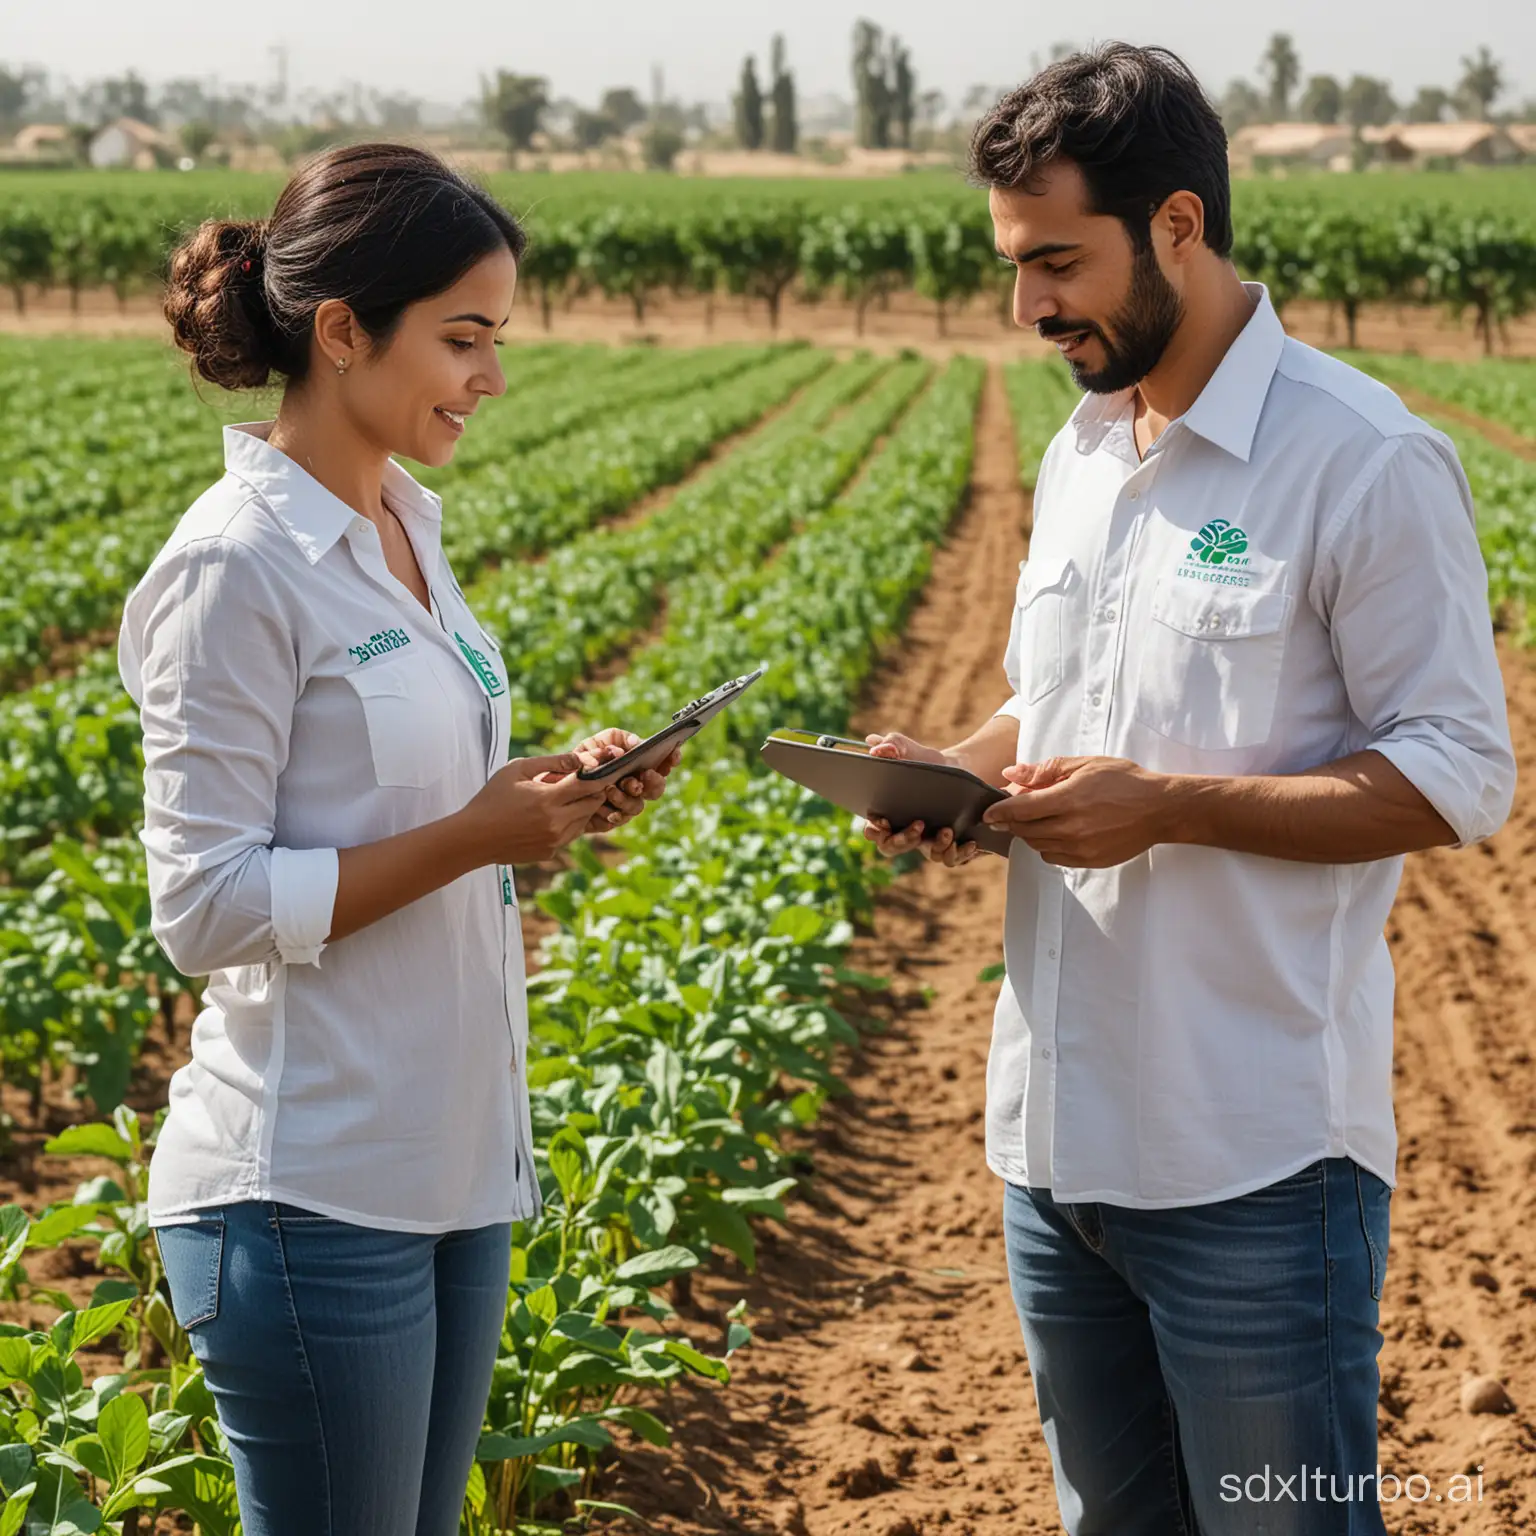 An image depicting a collaborative interaction between two individuals on a vibrant, thriving farm. One person is an agricultural producer, attentively listening and holding a clipboard, while the other, a representative from AZUD, is explaining details and pointing towards the crops. This AZUD representative is wearing a shirt clearly emblazoned with the AZUD logo. They stand in the midst of a lush field equipped with modern irrigation technology, symbolizing a partnership focused on agricultural growth. The scene conveys the philosophy 'Crecer haciendo Crecer' (Grow by Making Grow), highlighting a mutual commitment to enhancing productivity and sustainability